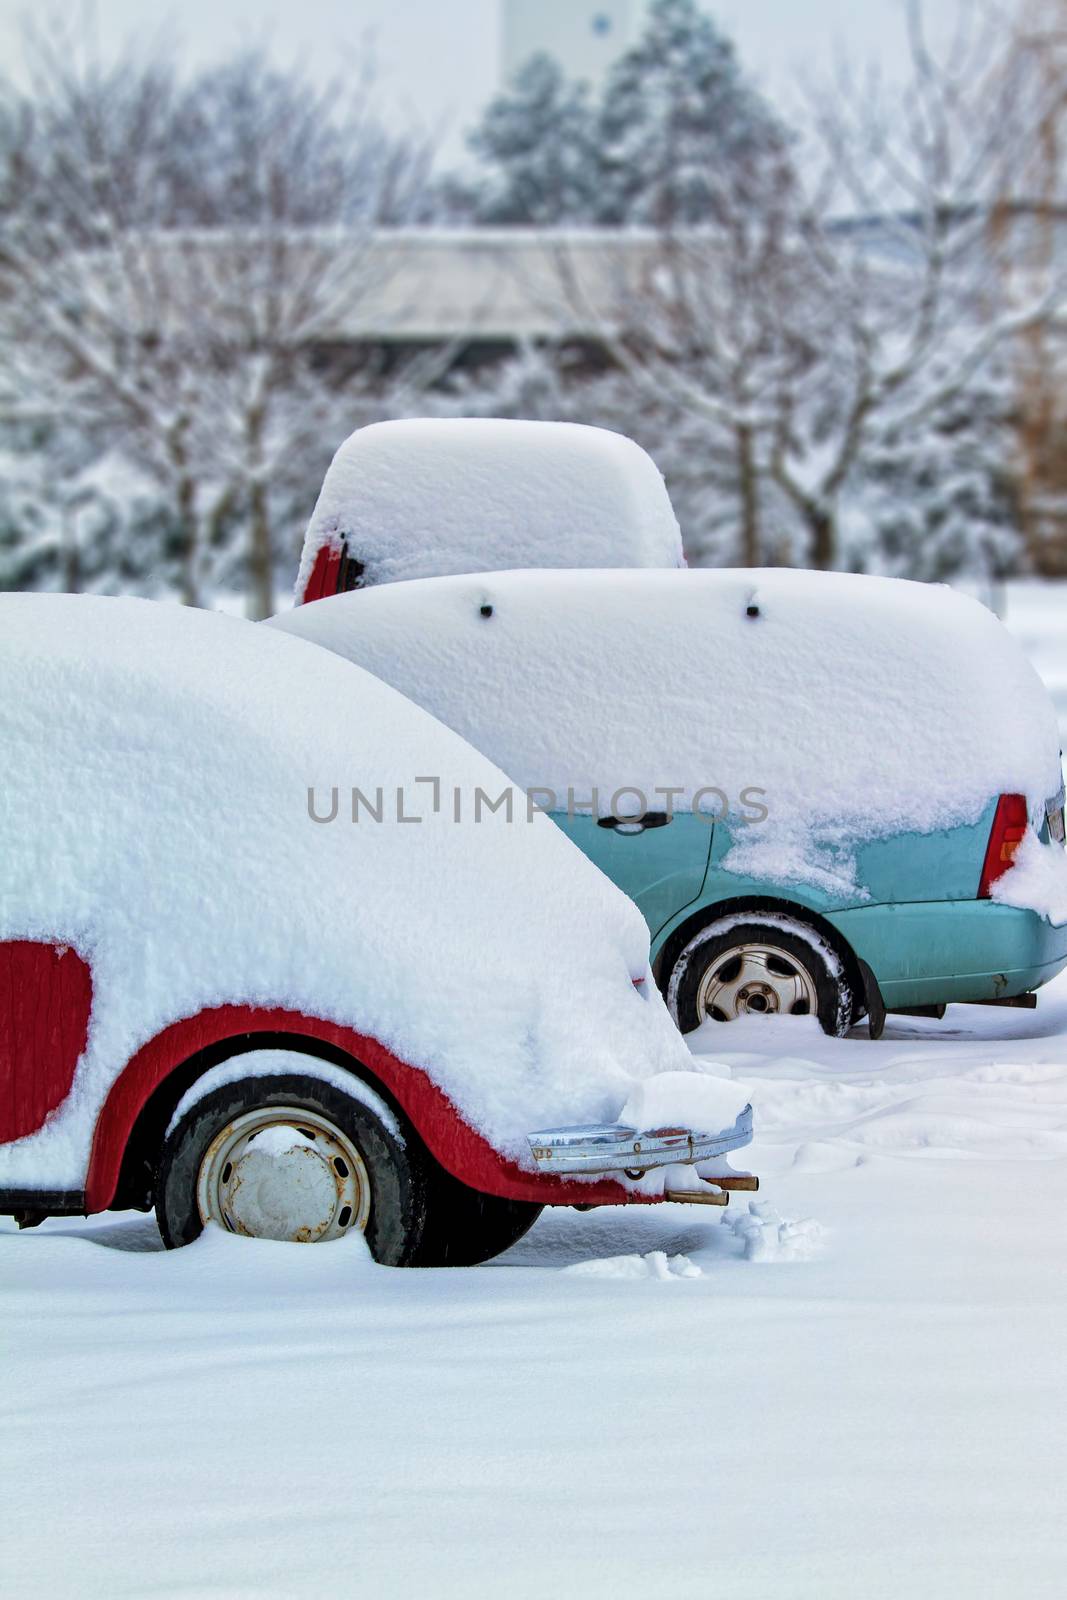 Snow-covered cars in the yard